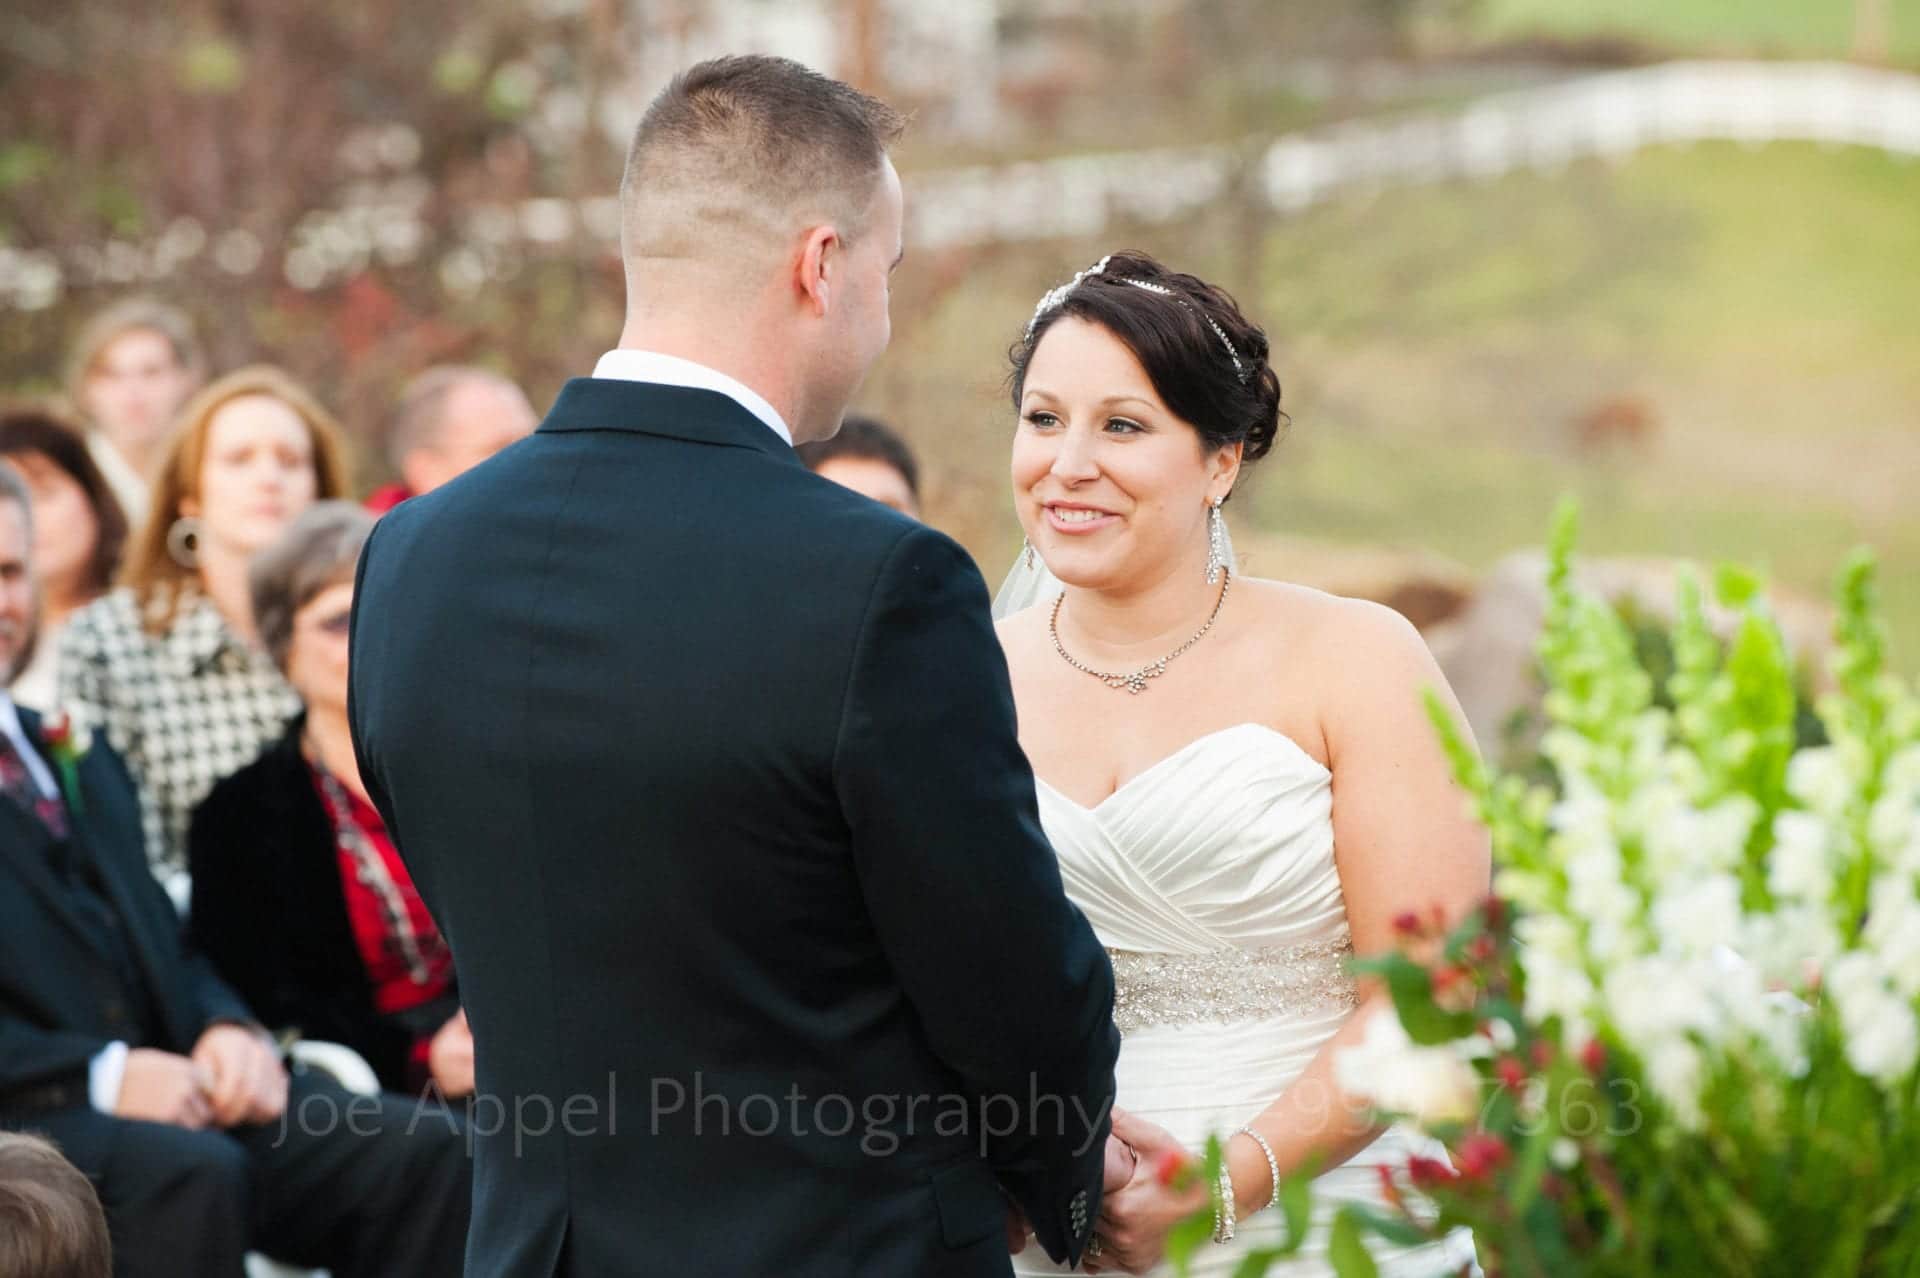 A brown haired bride smiles as she looks up at her groom while exchanging wedding vows. Armstrong Farms Weddings